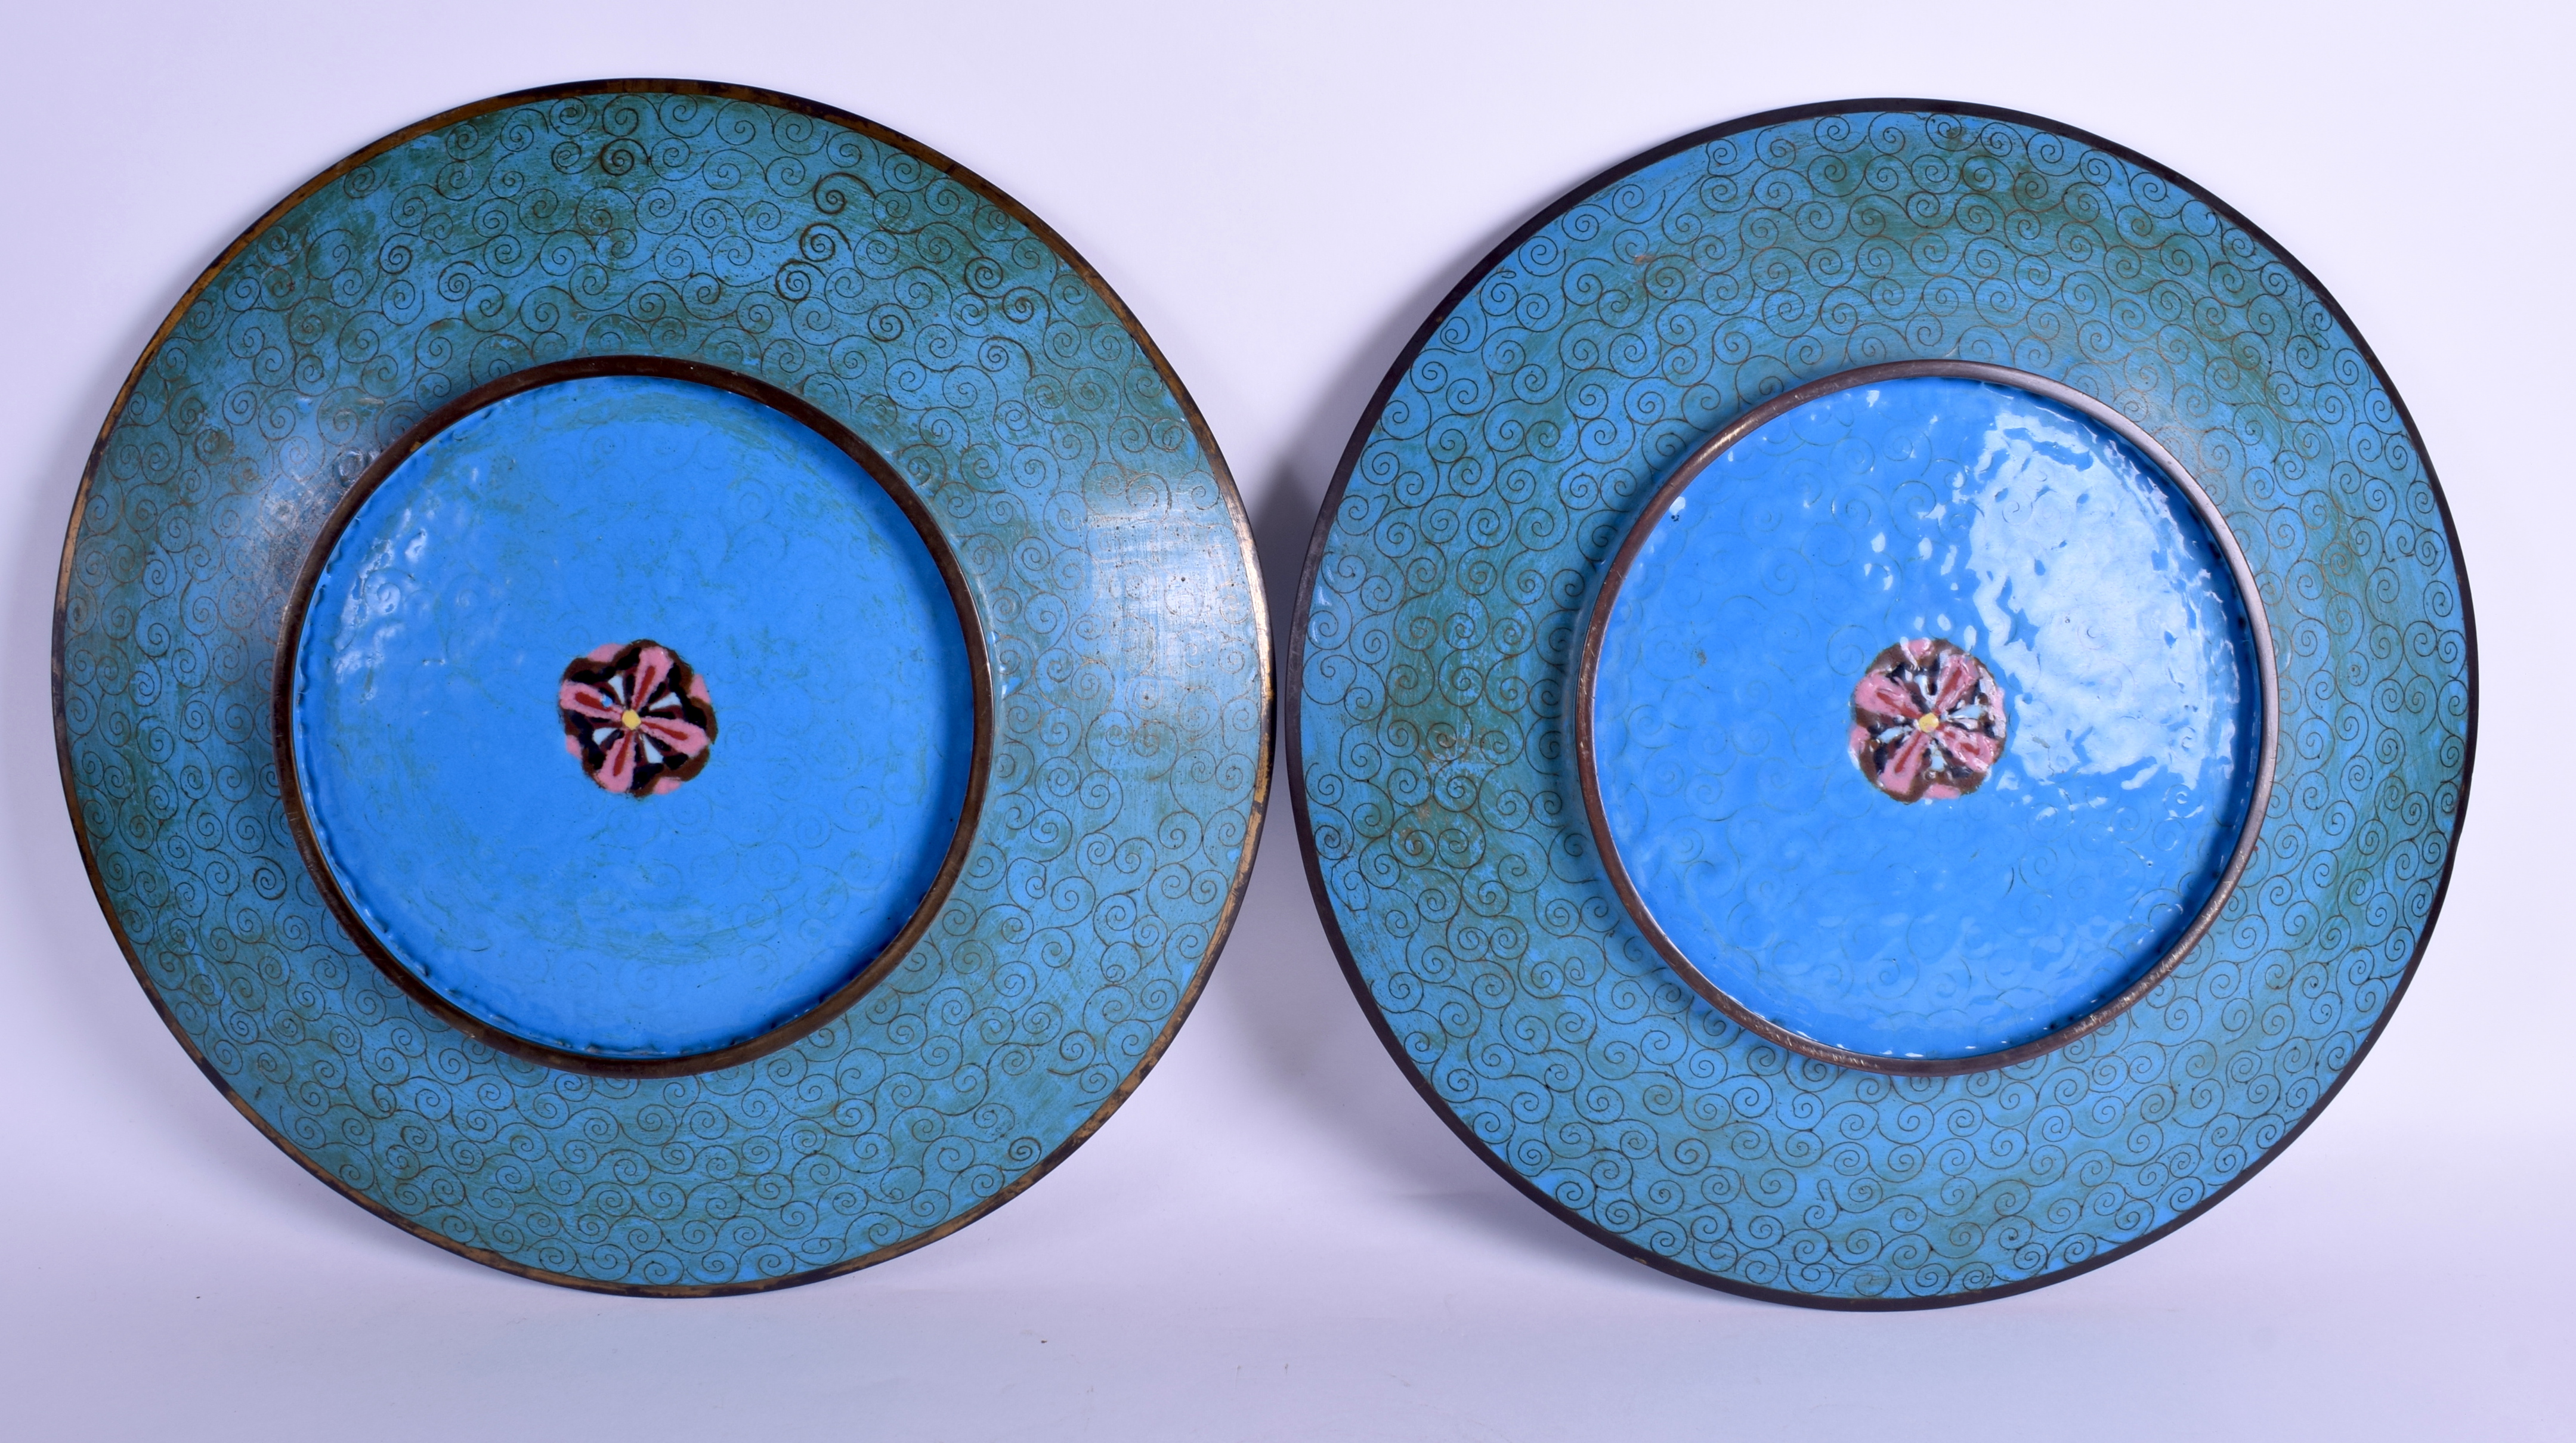 A GOOD PAIR OF 19TH CENTURY JAPANESE MEIJI PERIOD CLOISONNE ENAMEL DISHES decorated with cranes in - Image 2 of 2